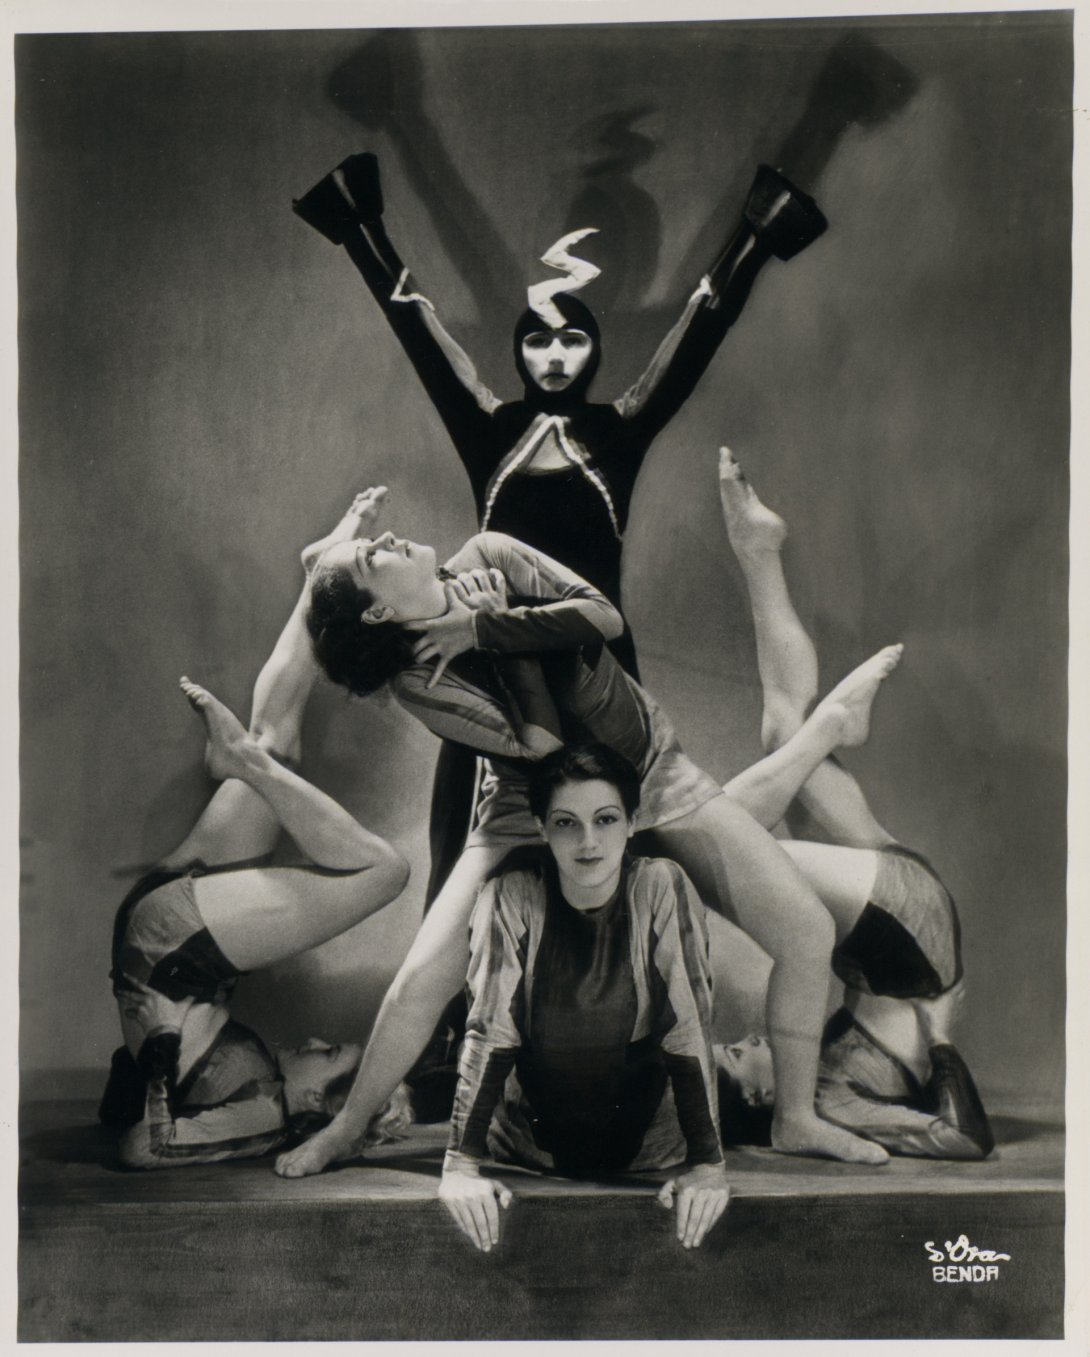 Five dancers in various costumes posing. Two dancers are balancing on their backs with their legs in the air, one is standing over the shoulders of another, and one at the back has their arms up.